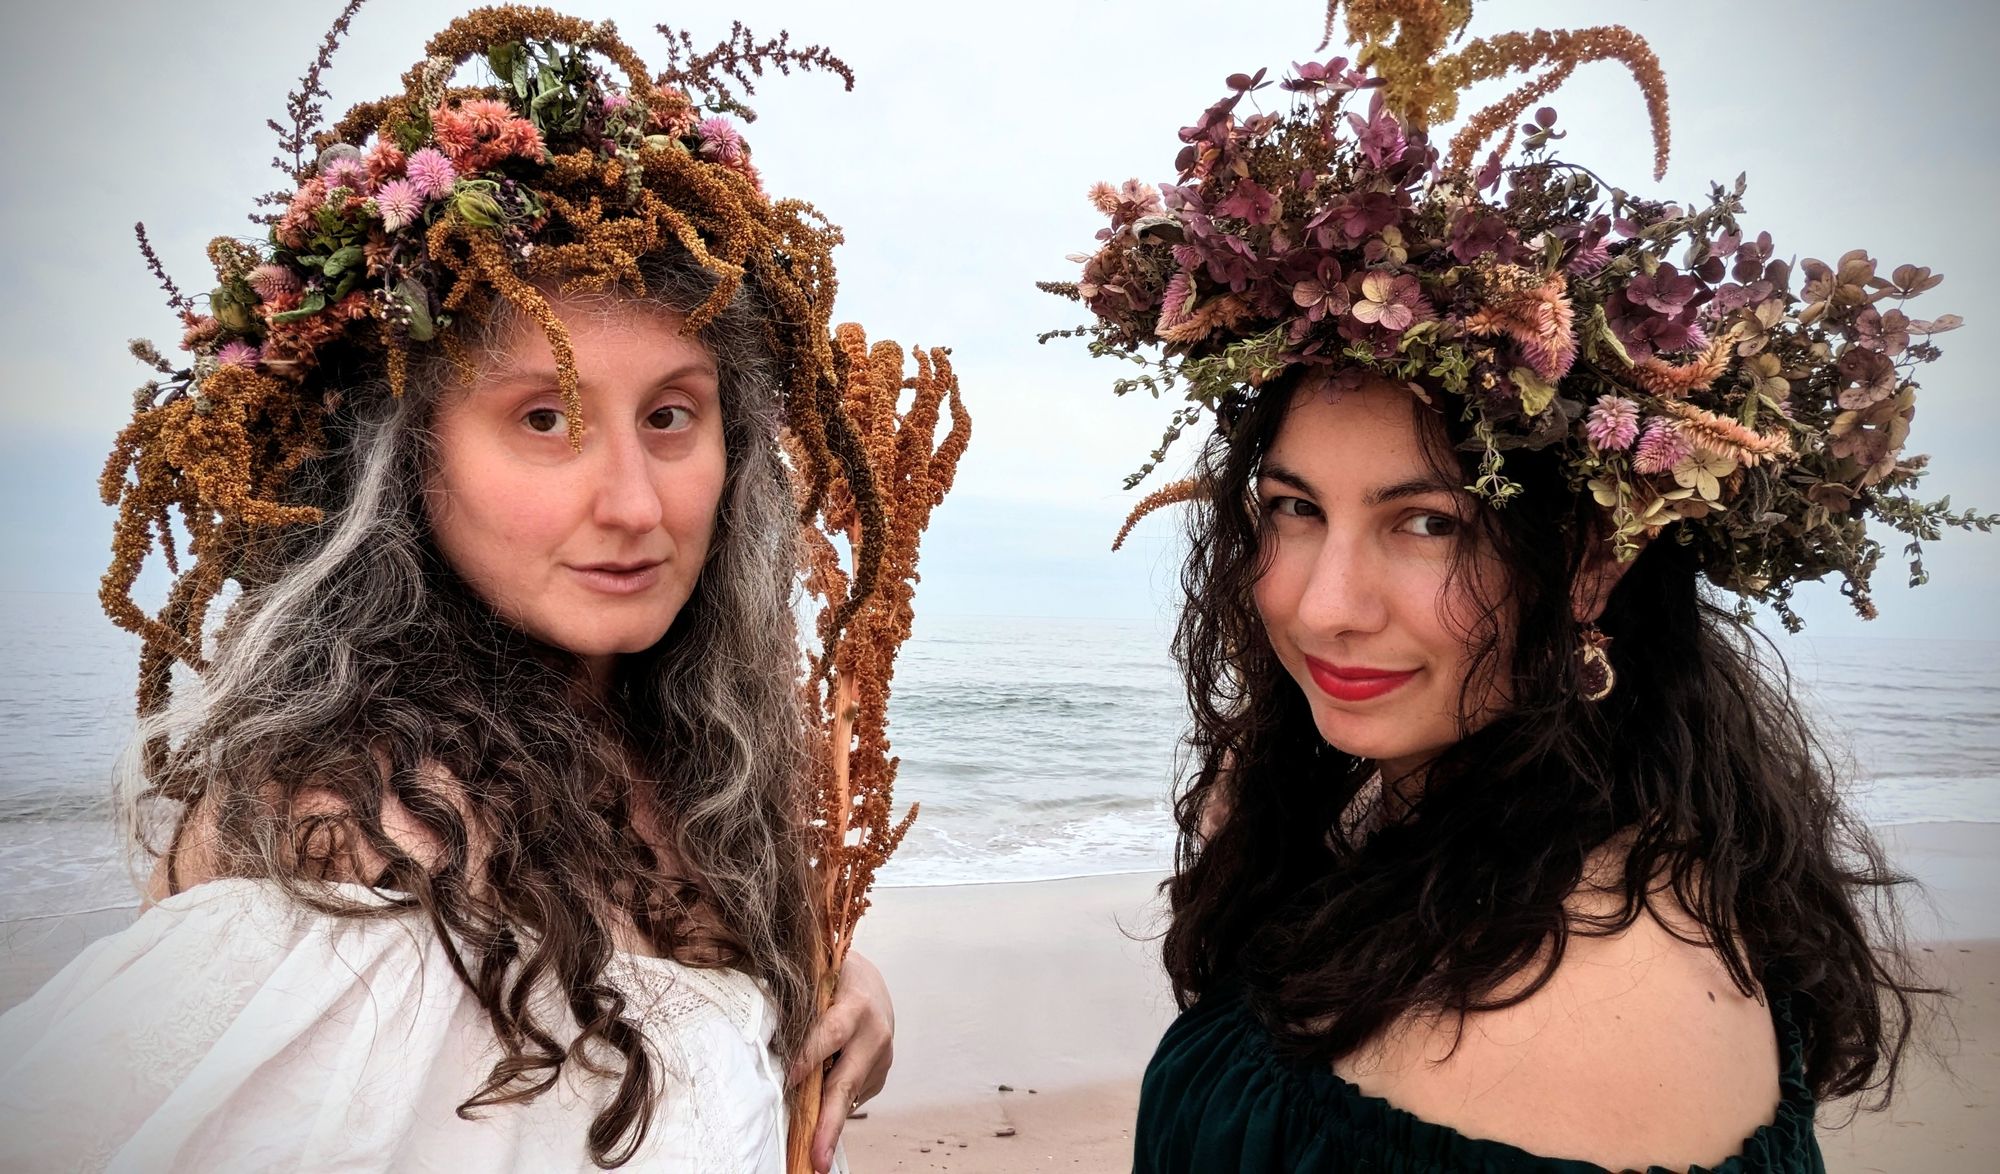 A dramatic beach photo in which two women stand across from each other wearing magnificently elaborate flower crowns and holding tall stalks of amaranth with the ocean behind them, looking over their shoulders towards the camera.  On the left is Caitlyn Paxson, a white woman with sorcerous streaks of white and silver in her long curling brown hair, wearing a flowing white shirt and a crown featuring long tendrils of amaranth; on the right is Amal El-Mohtar, a middle-eastern woman with very dark wavy hair, wearing a crown featuring celosia and hydrangea. Both women are smiling slightly and look amazing.